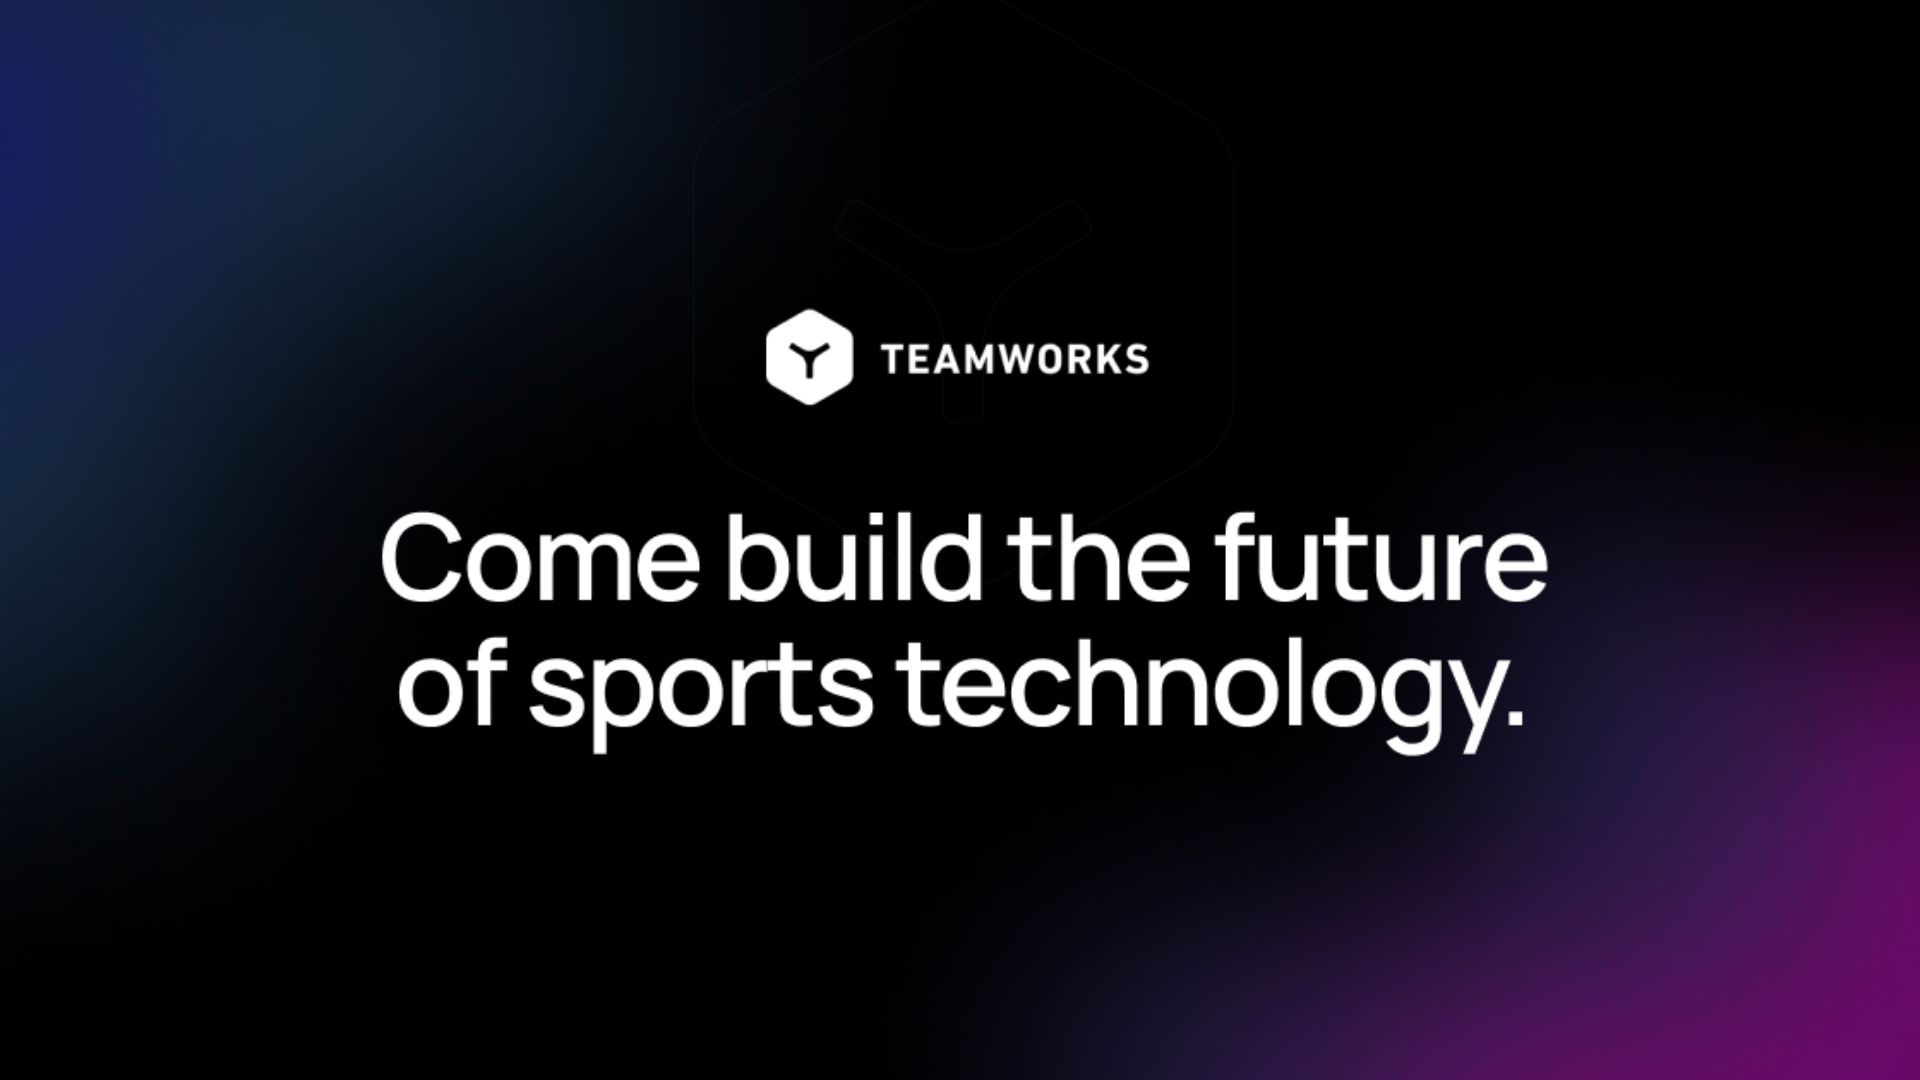  US Software Company Teamworks Acquires Andrew Trimble’s Sports Tech Firm